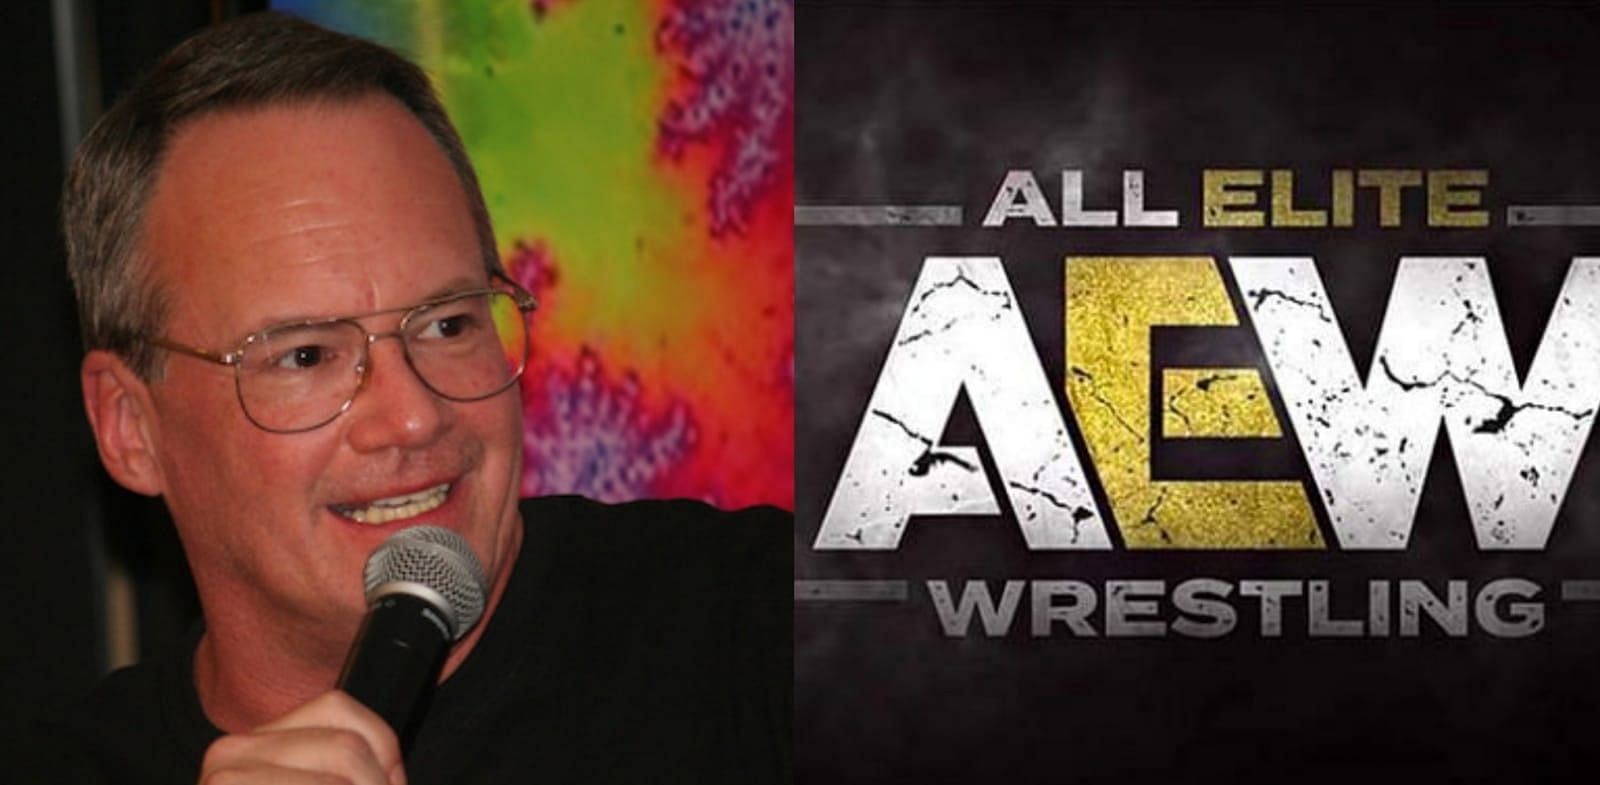 Jim Cornette believes AEW will be fine without Chris Jericho and the Young Bucks